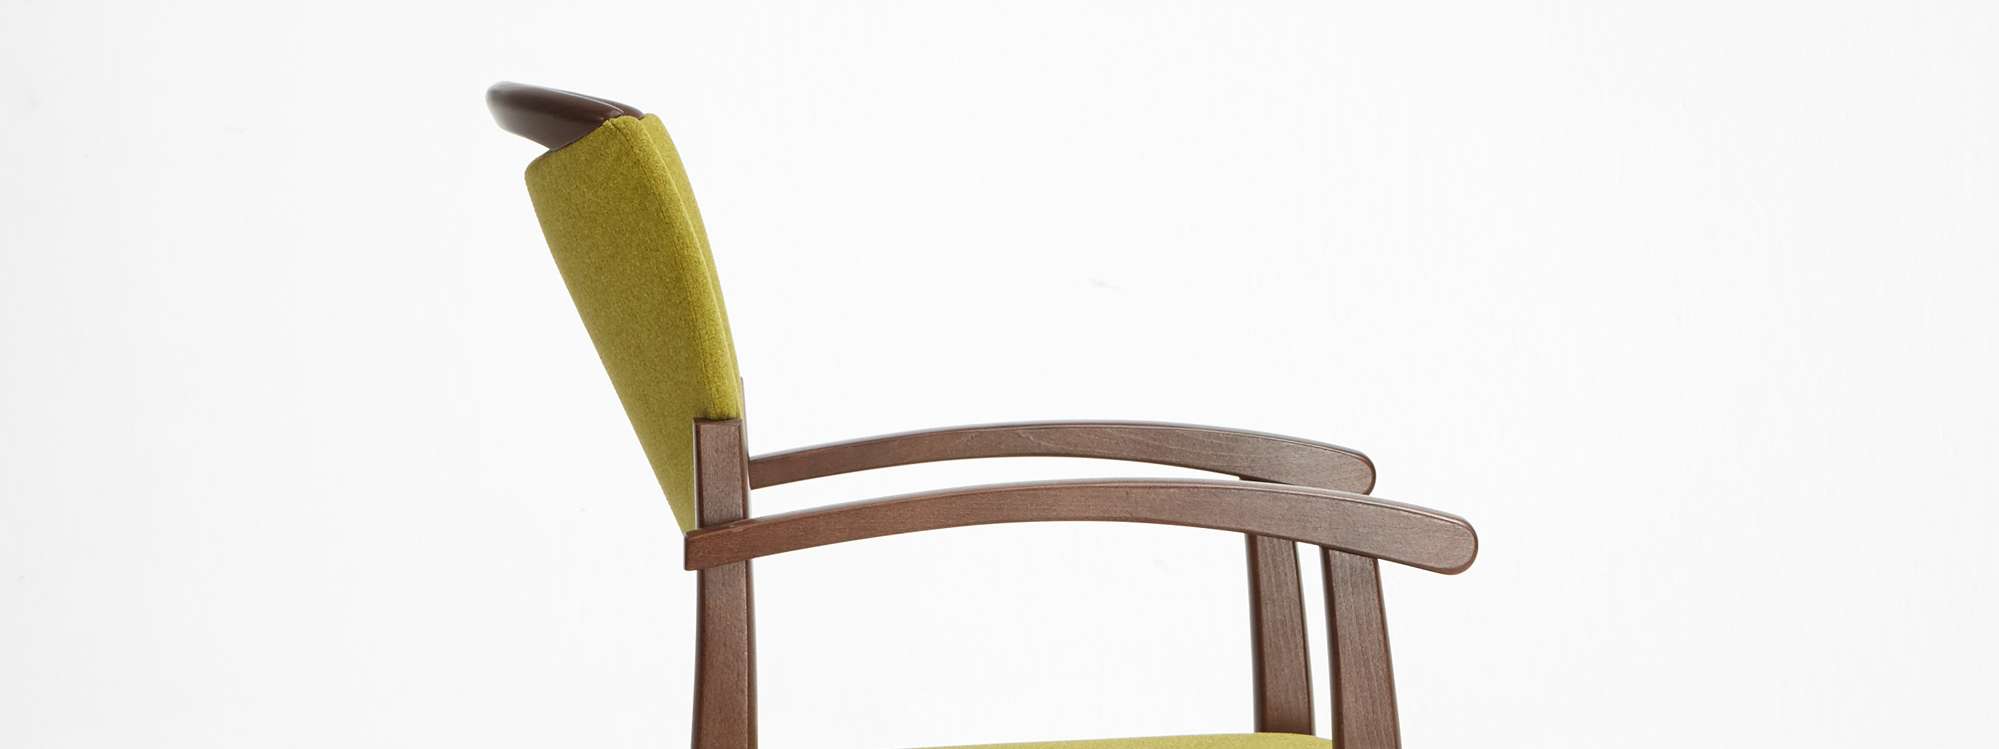 The Fena model as a stackable chair with armrests and handle rail